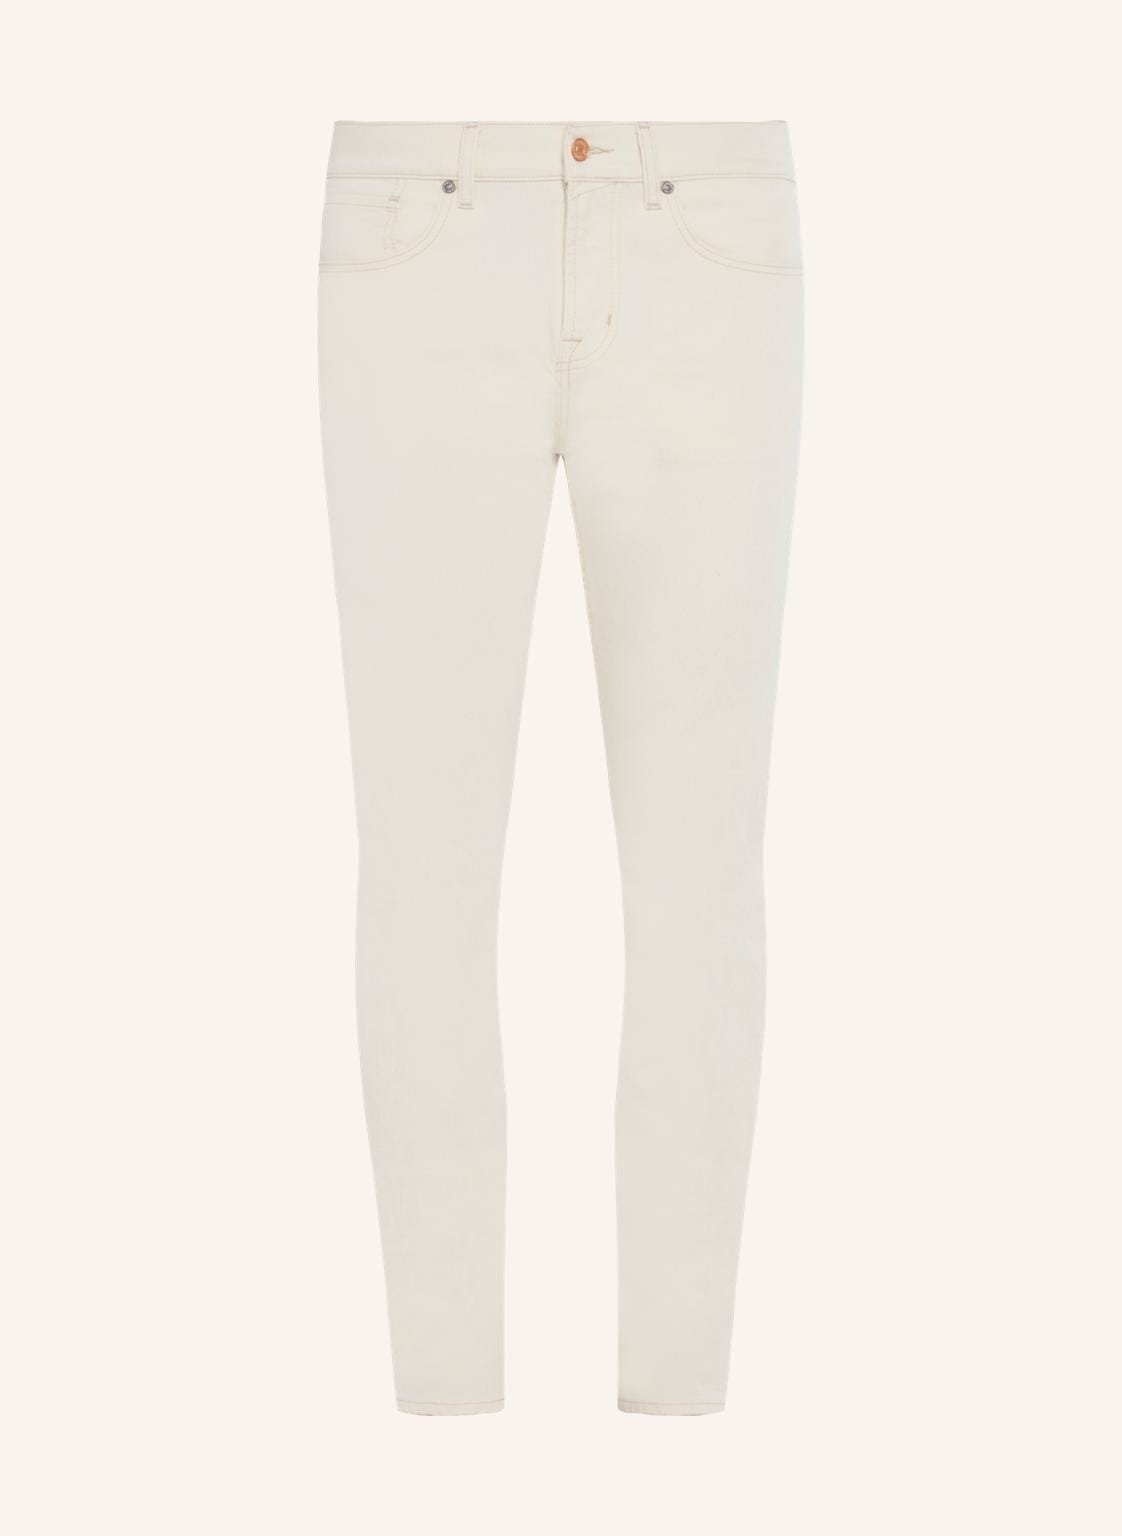 7 For All Mankind Jeans Slimmy Slim Fit weiss von 7 For All Mankind